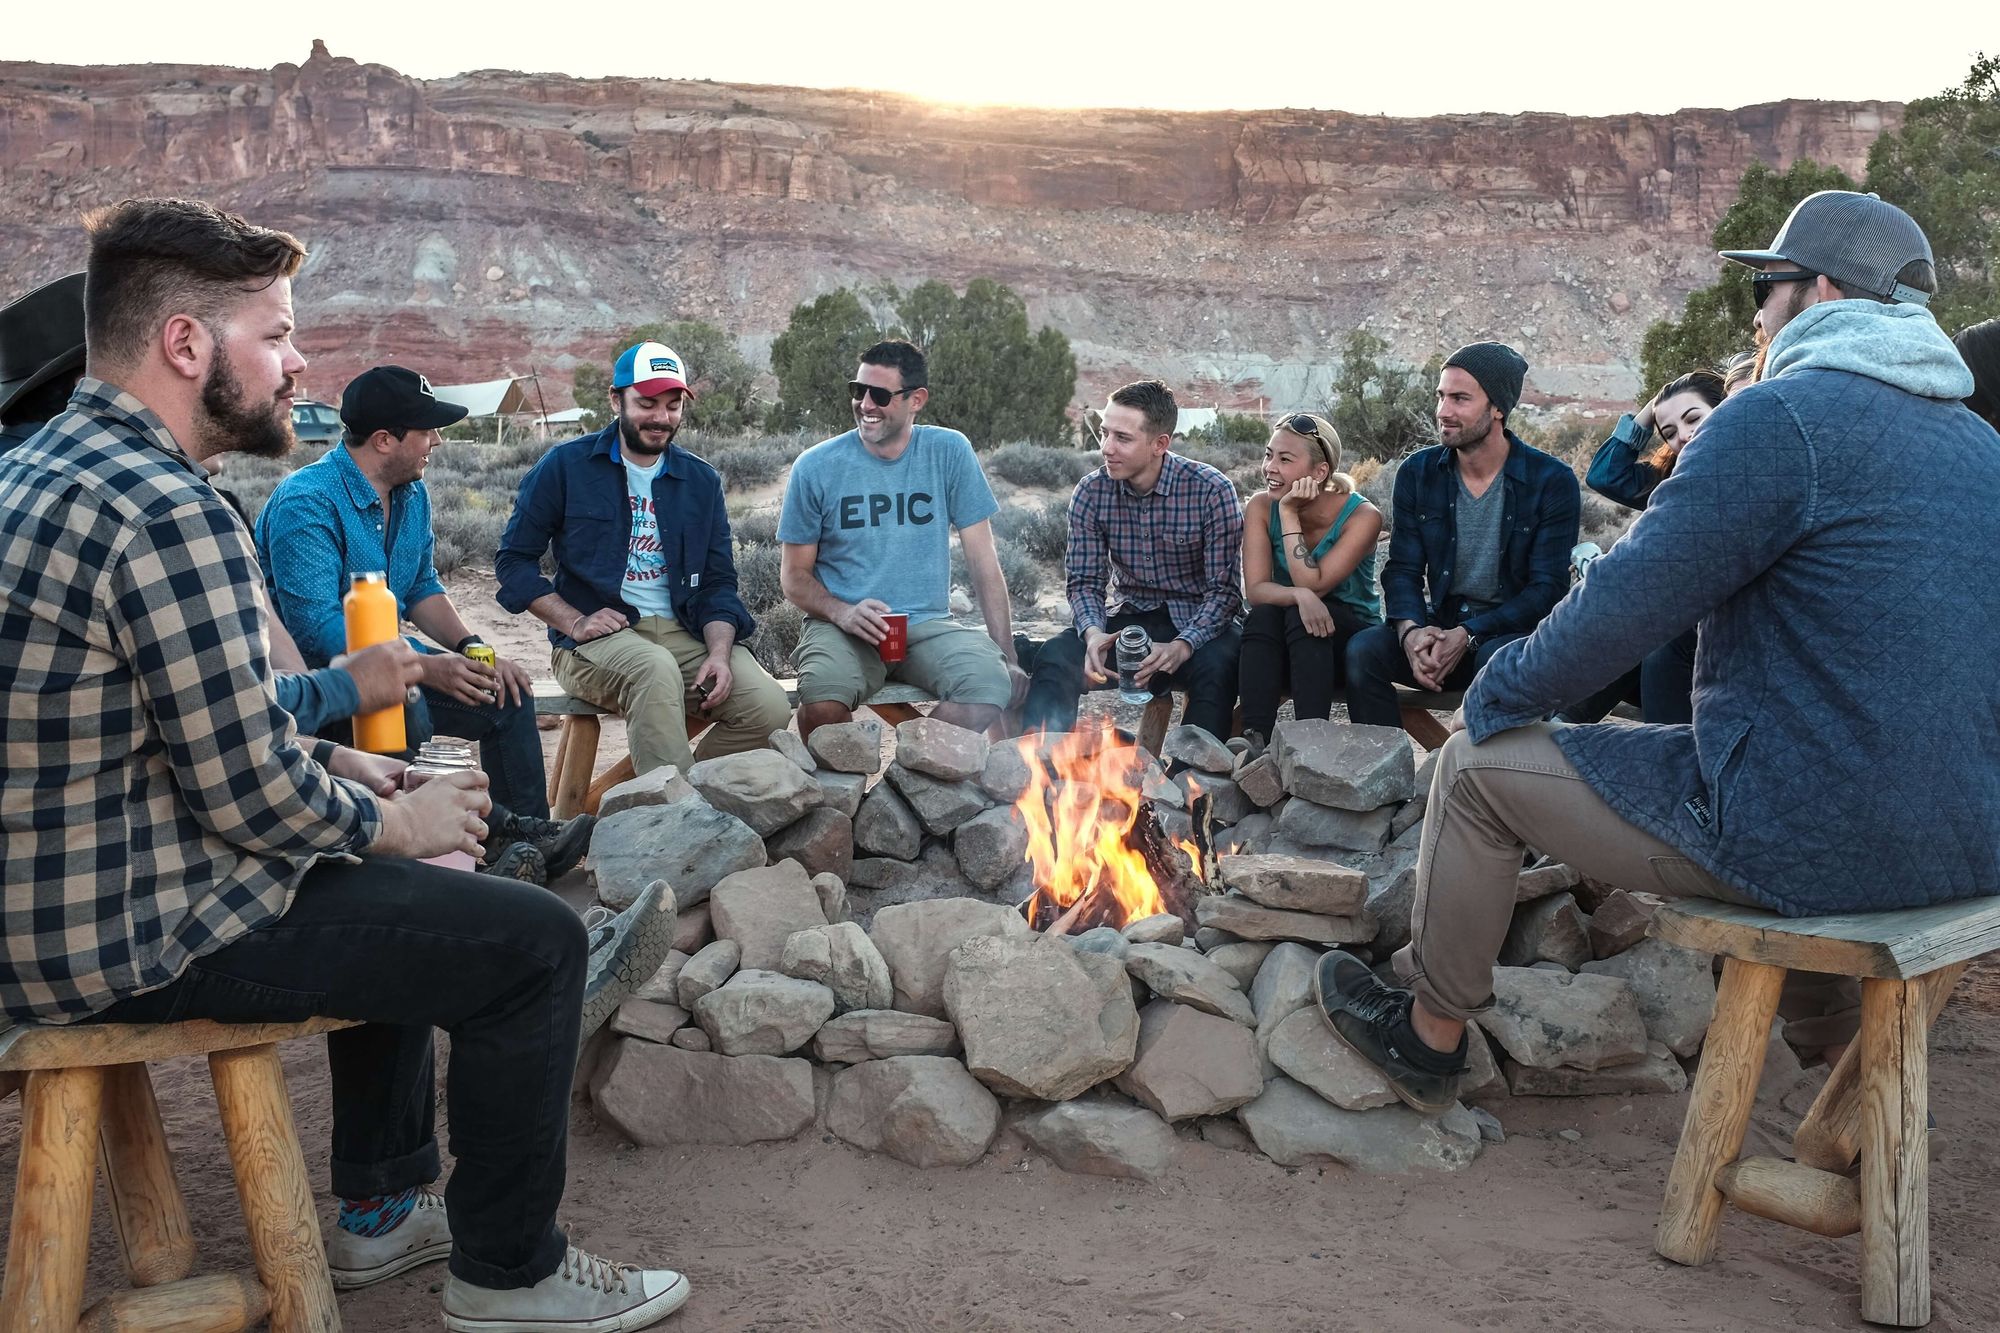 A group of campers laughing & socializing around a fire, in the daytime, with a canyon in the background.